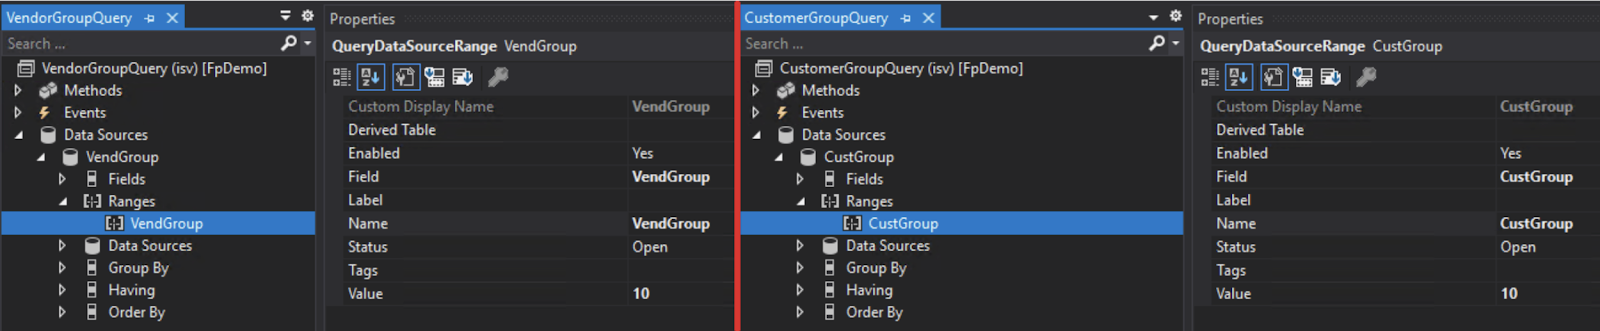 Vendor Group Query for XDS policies